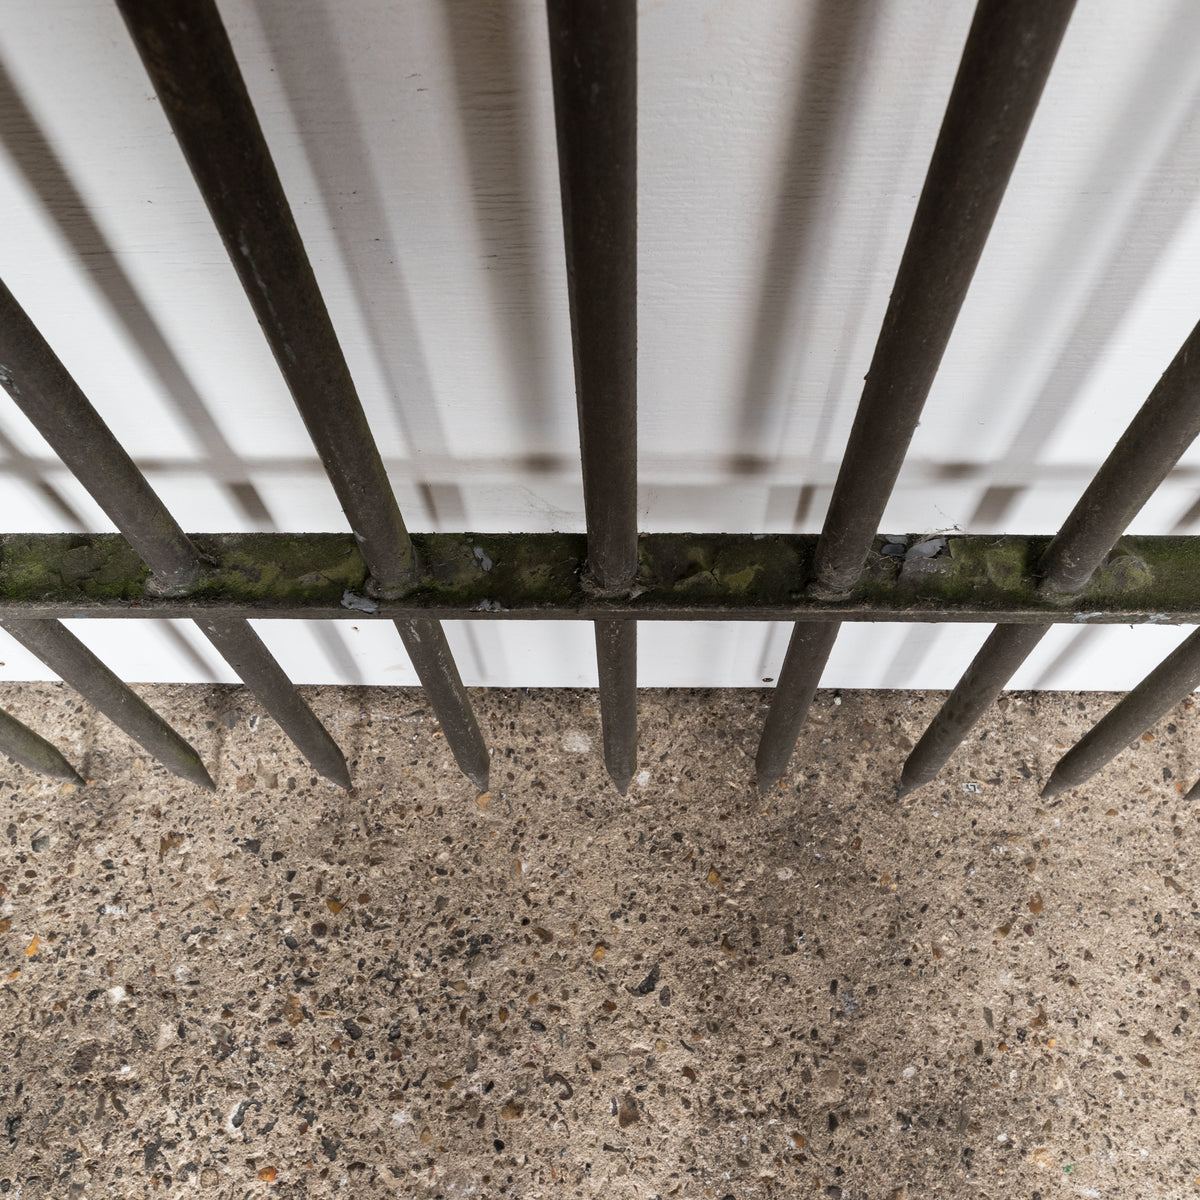 Reclaimed Double Spiked Galvanised Iron Railings | The Architectural Forum